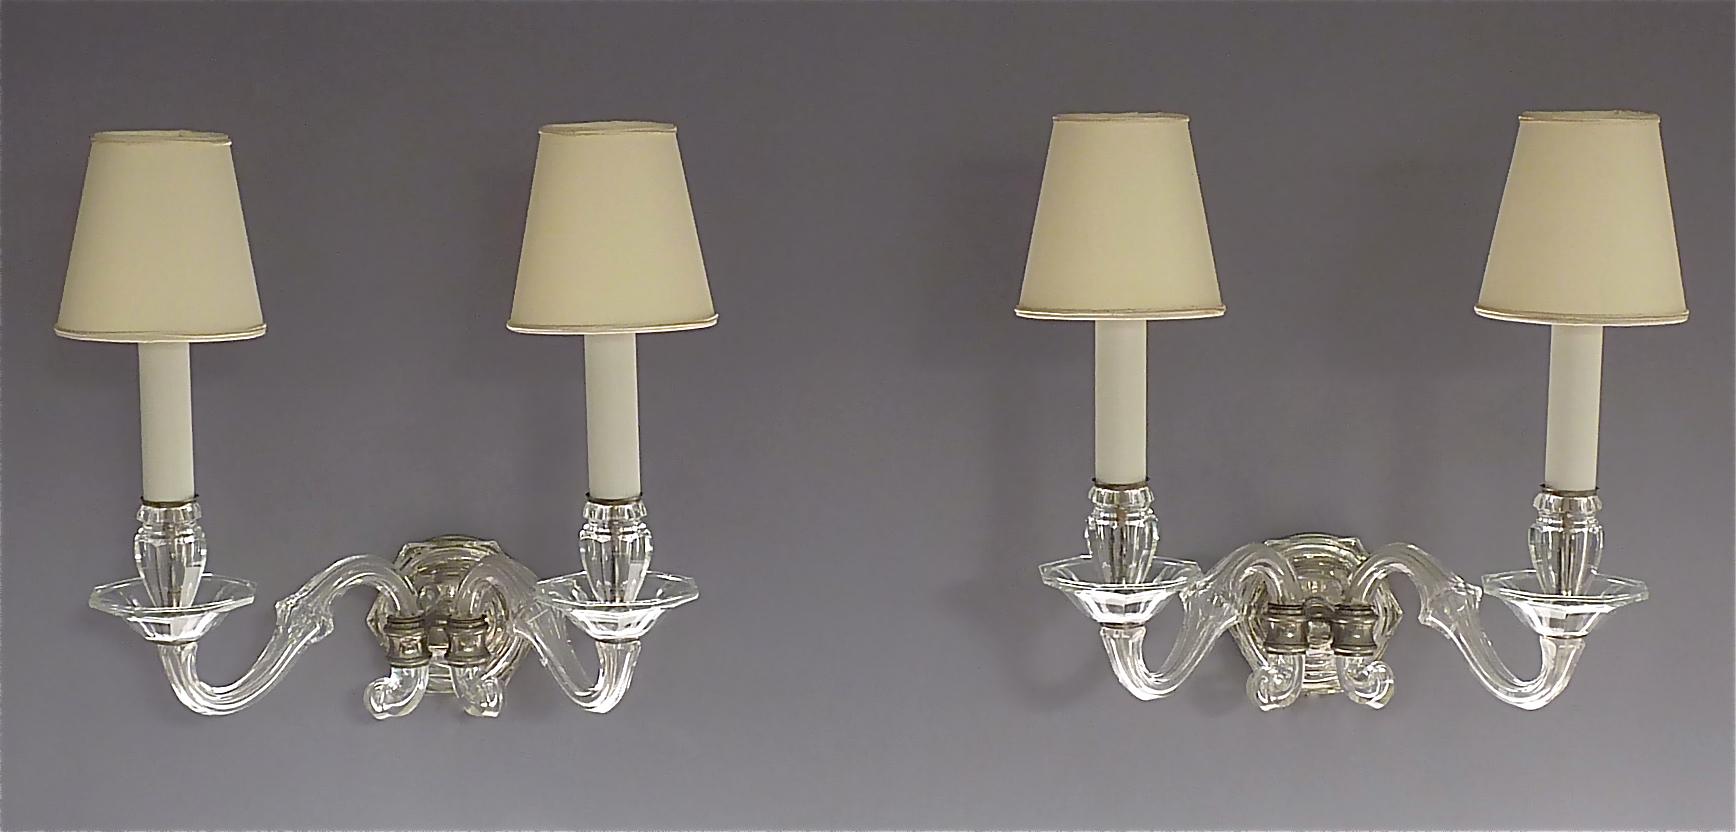 Pair of Art Deco Faceted Crystal Glass Wall Lights Sconces 1920, Baccarat Style 12